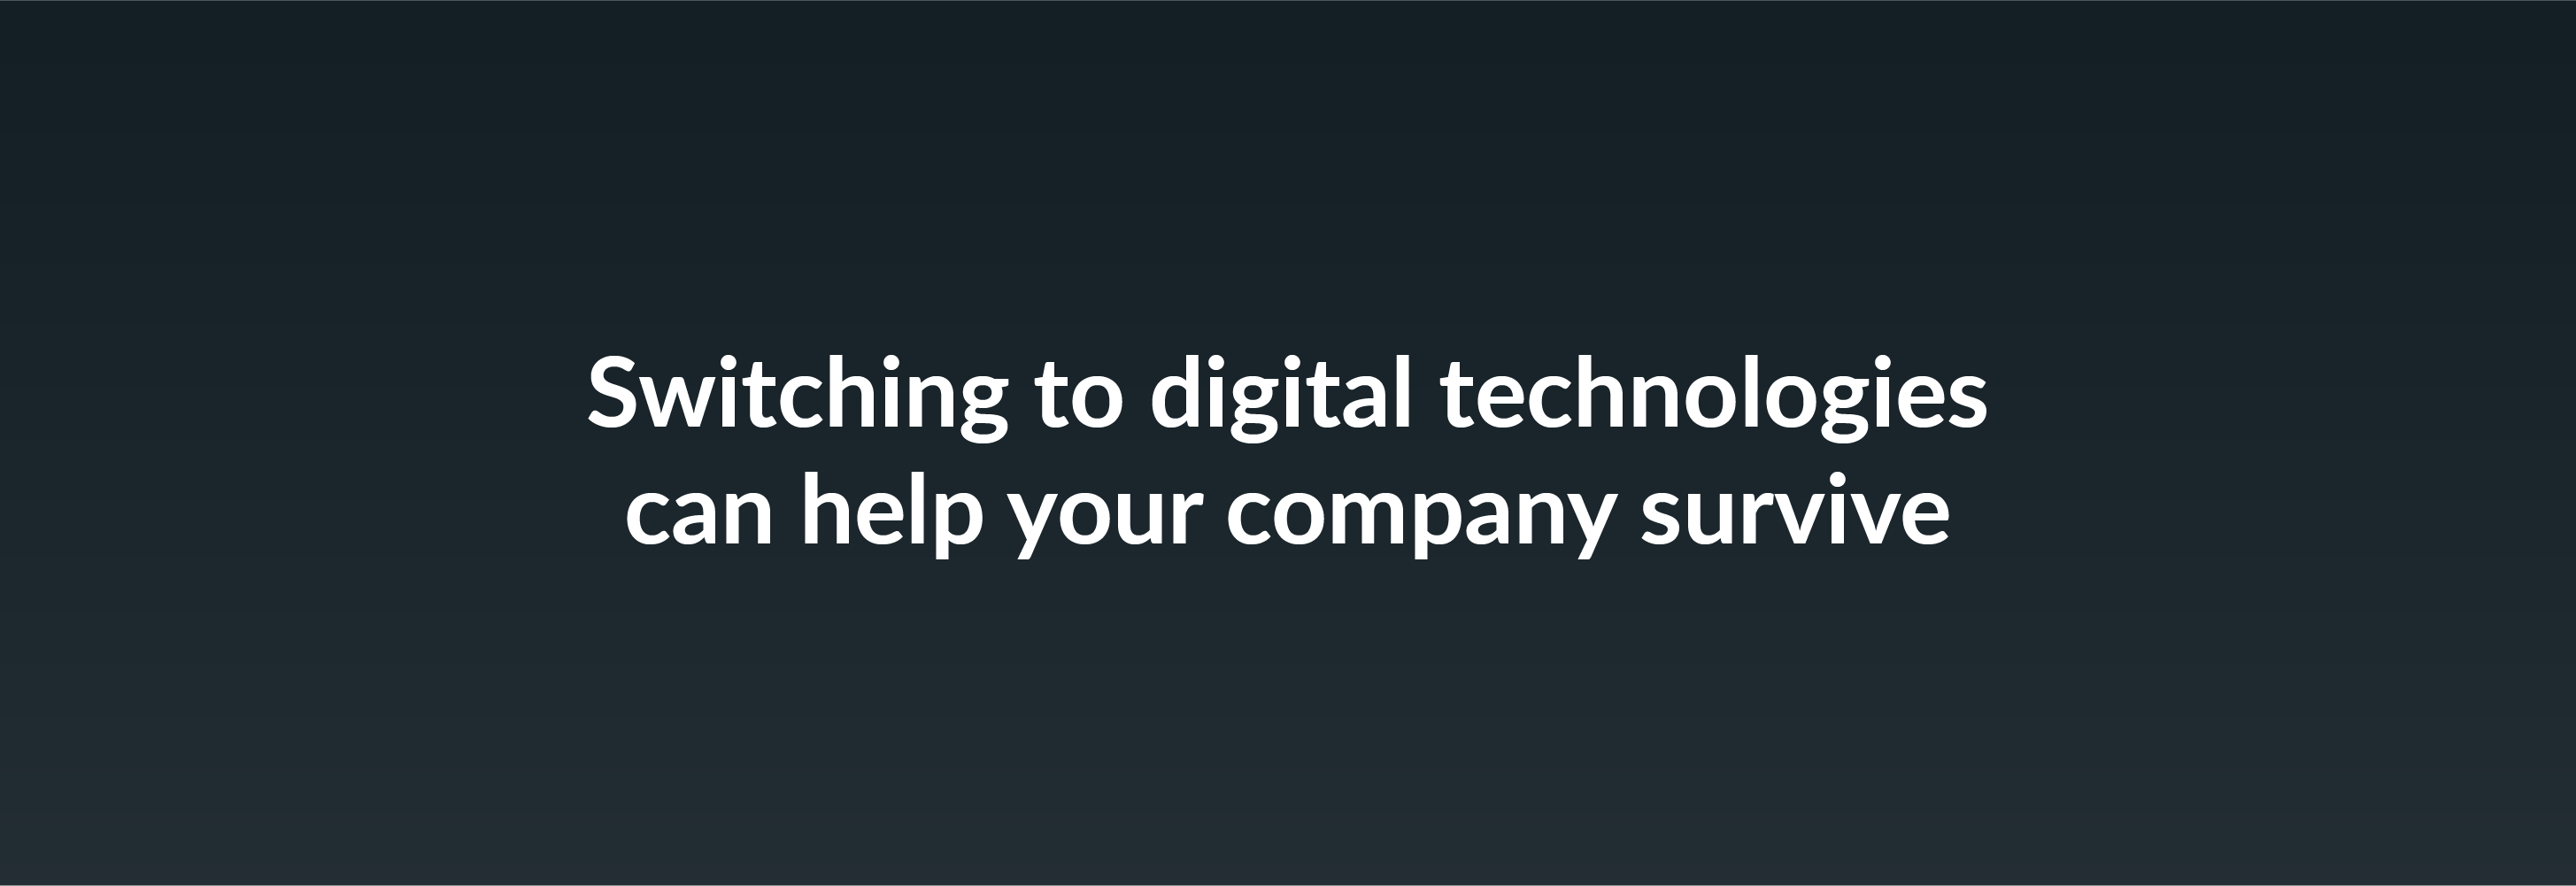 Switching to digital technologies can help your company survive